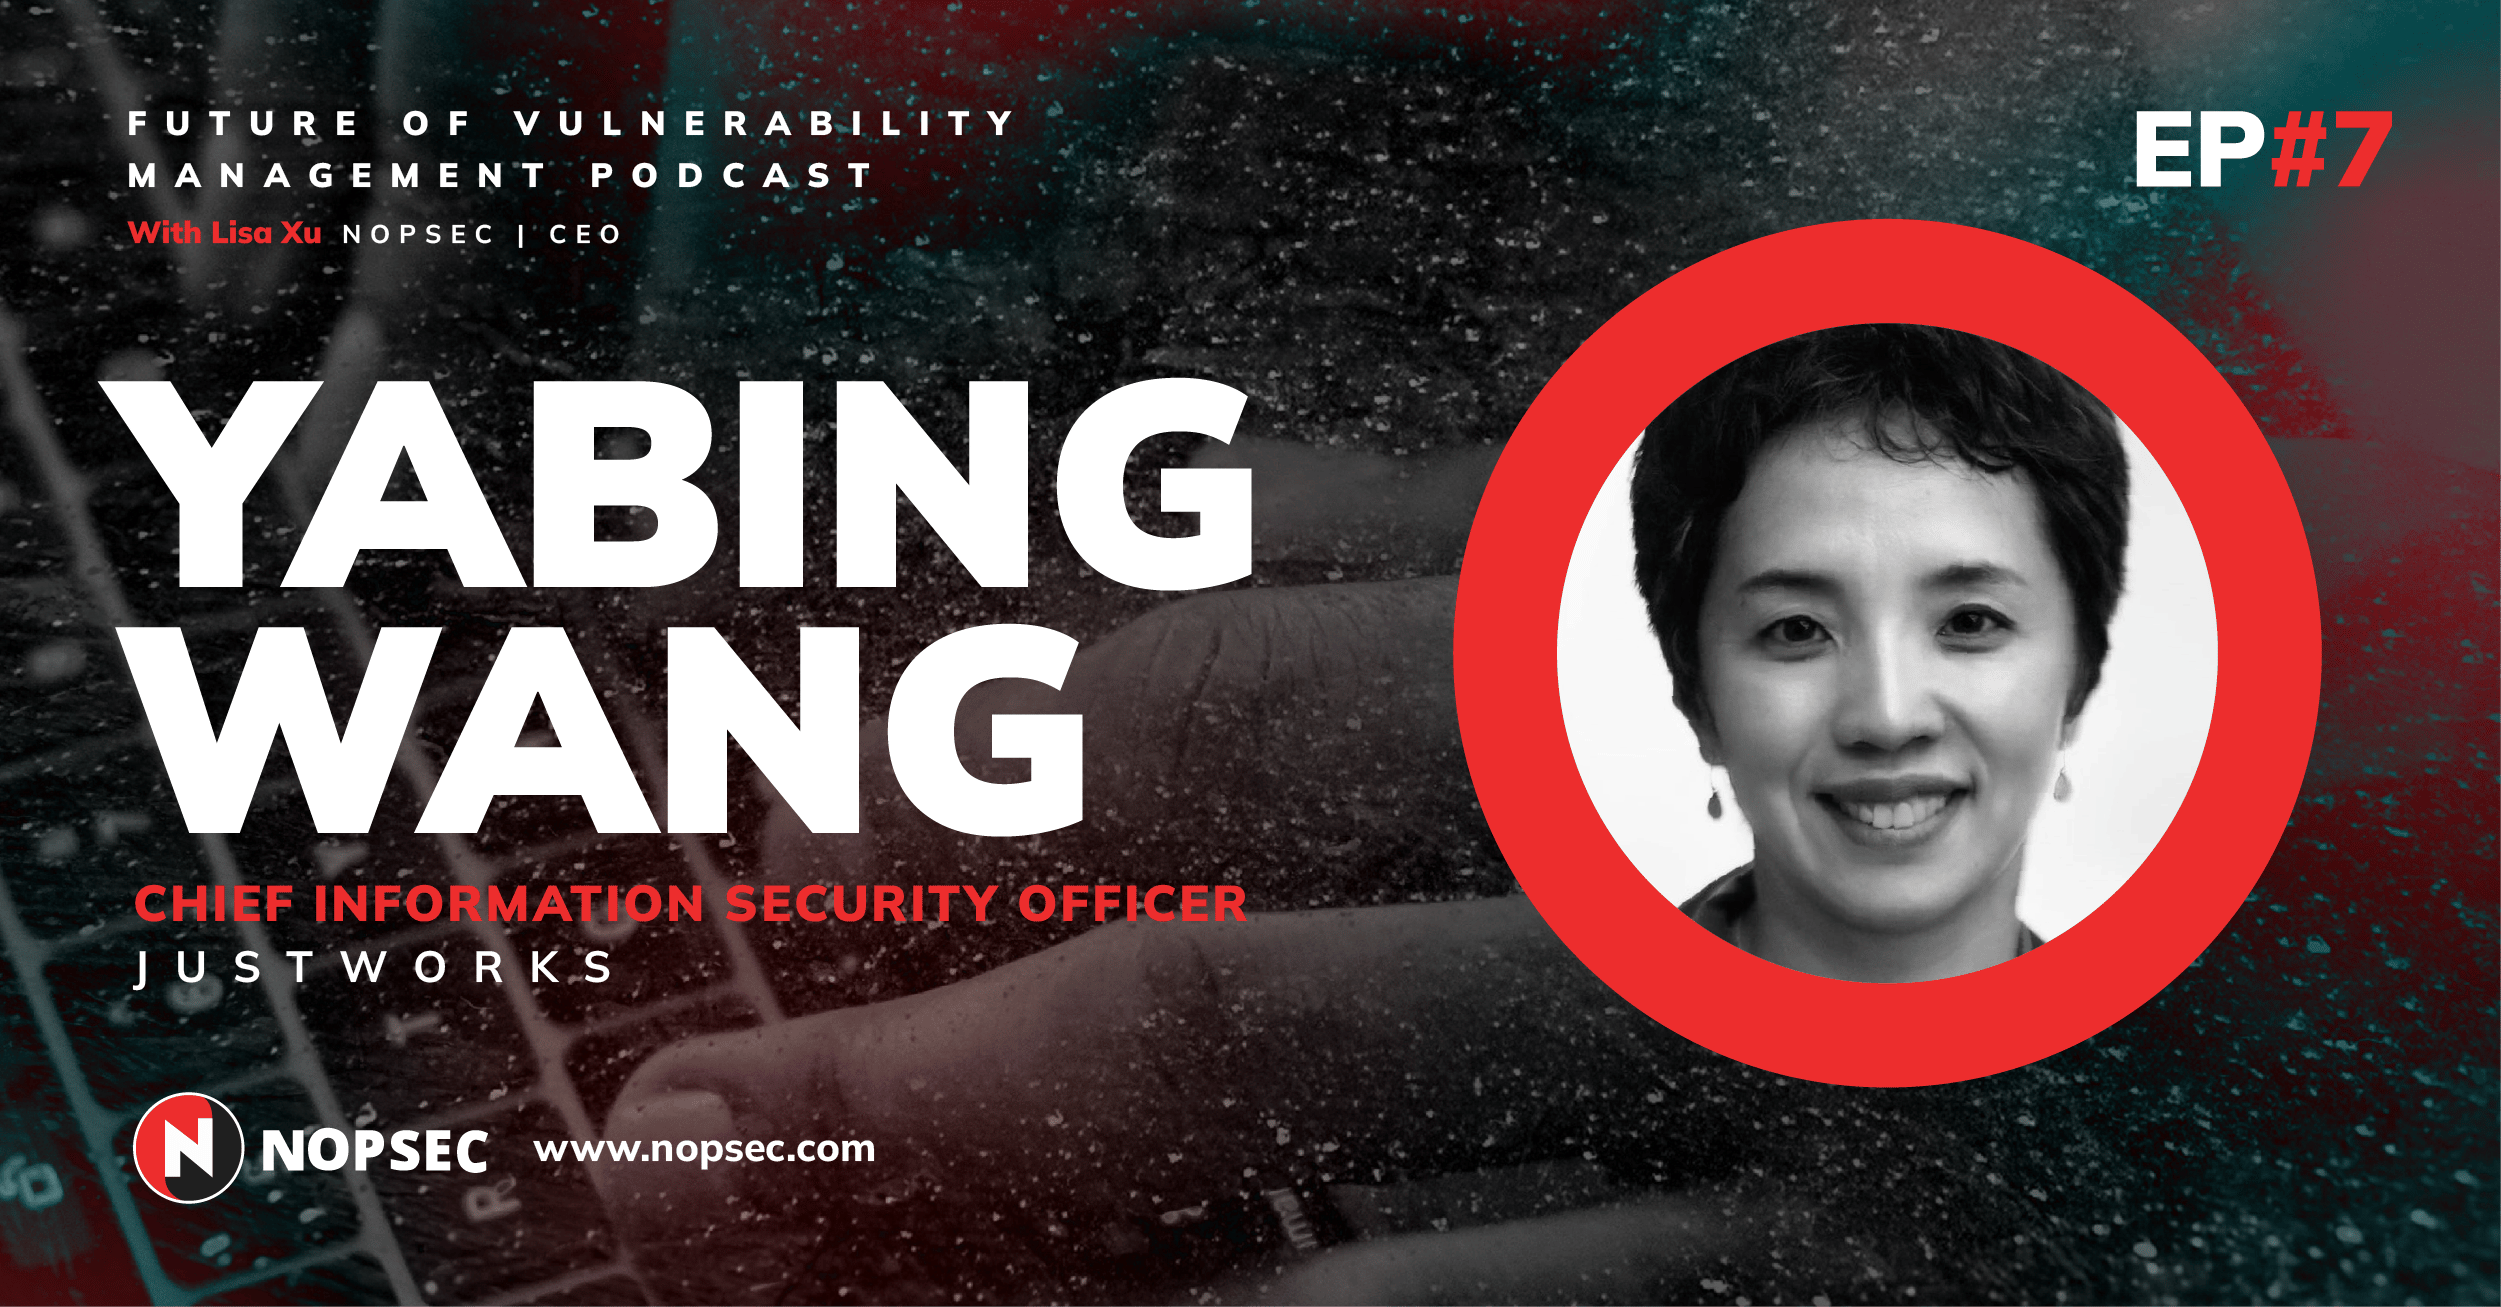 Future of Vulnerability Management Podcast Episode 7 Featuring Yabing Wang